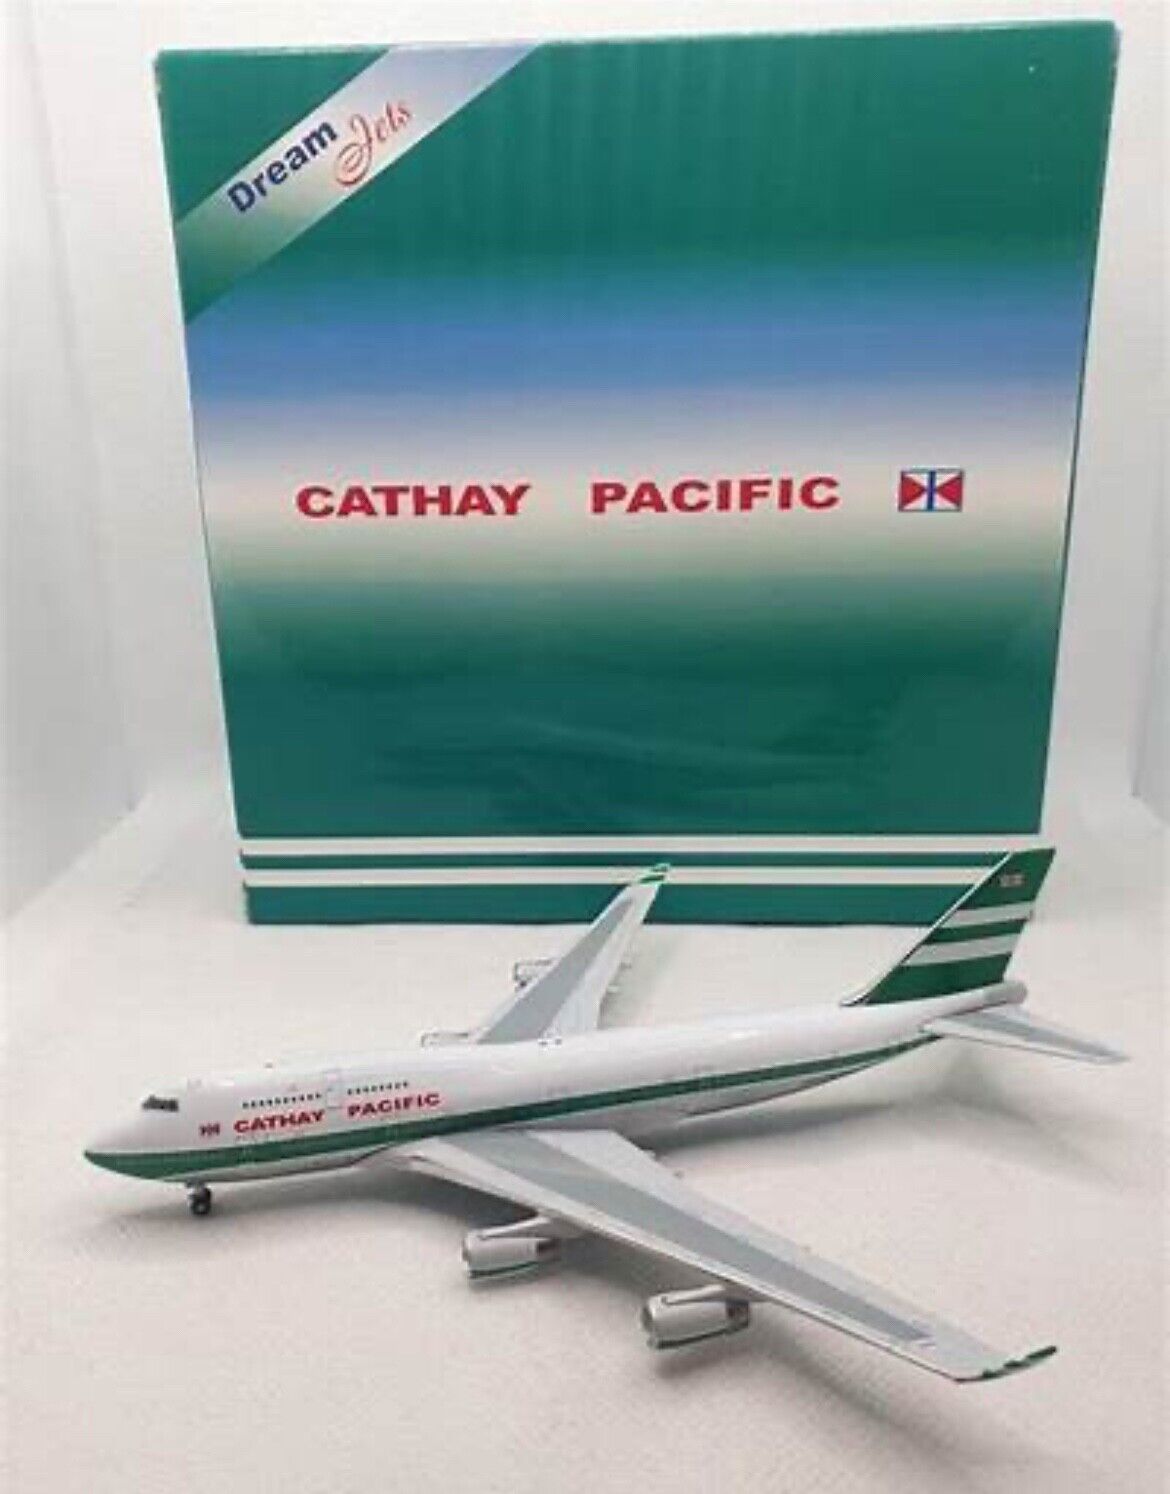 RARE Dream Jets BigBird mould 1/400 Cathay Pacific B747-400 VR-HOP MENT